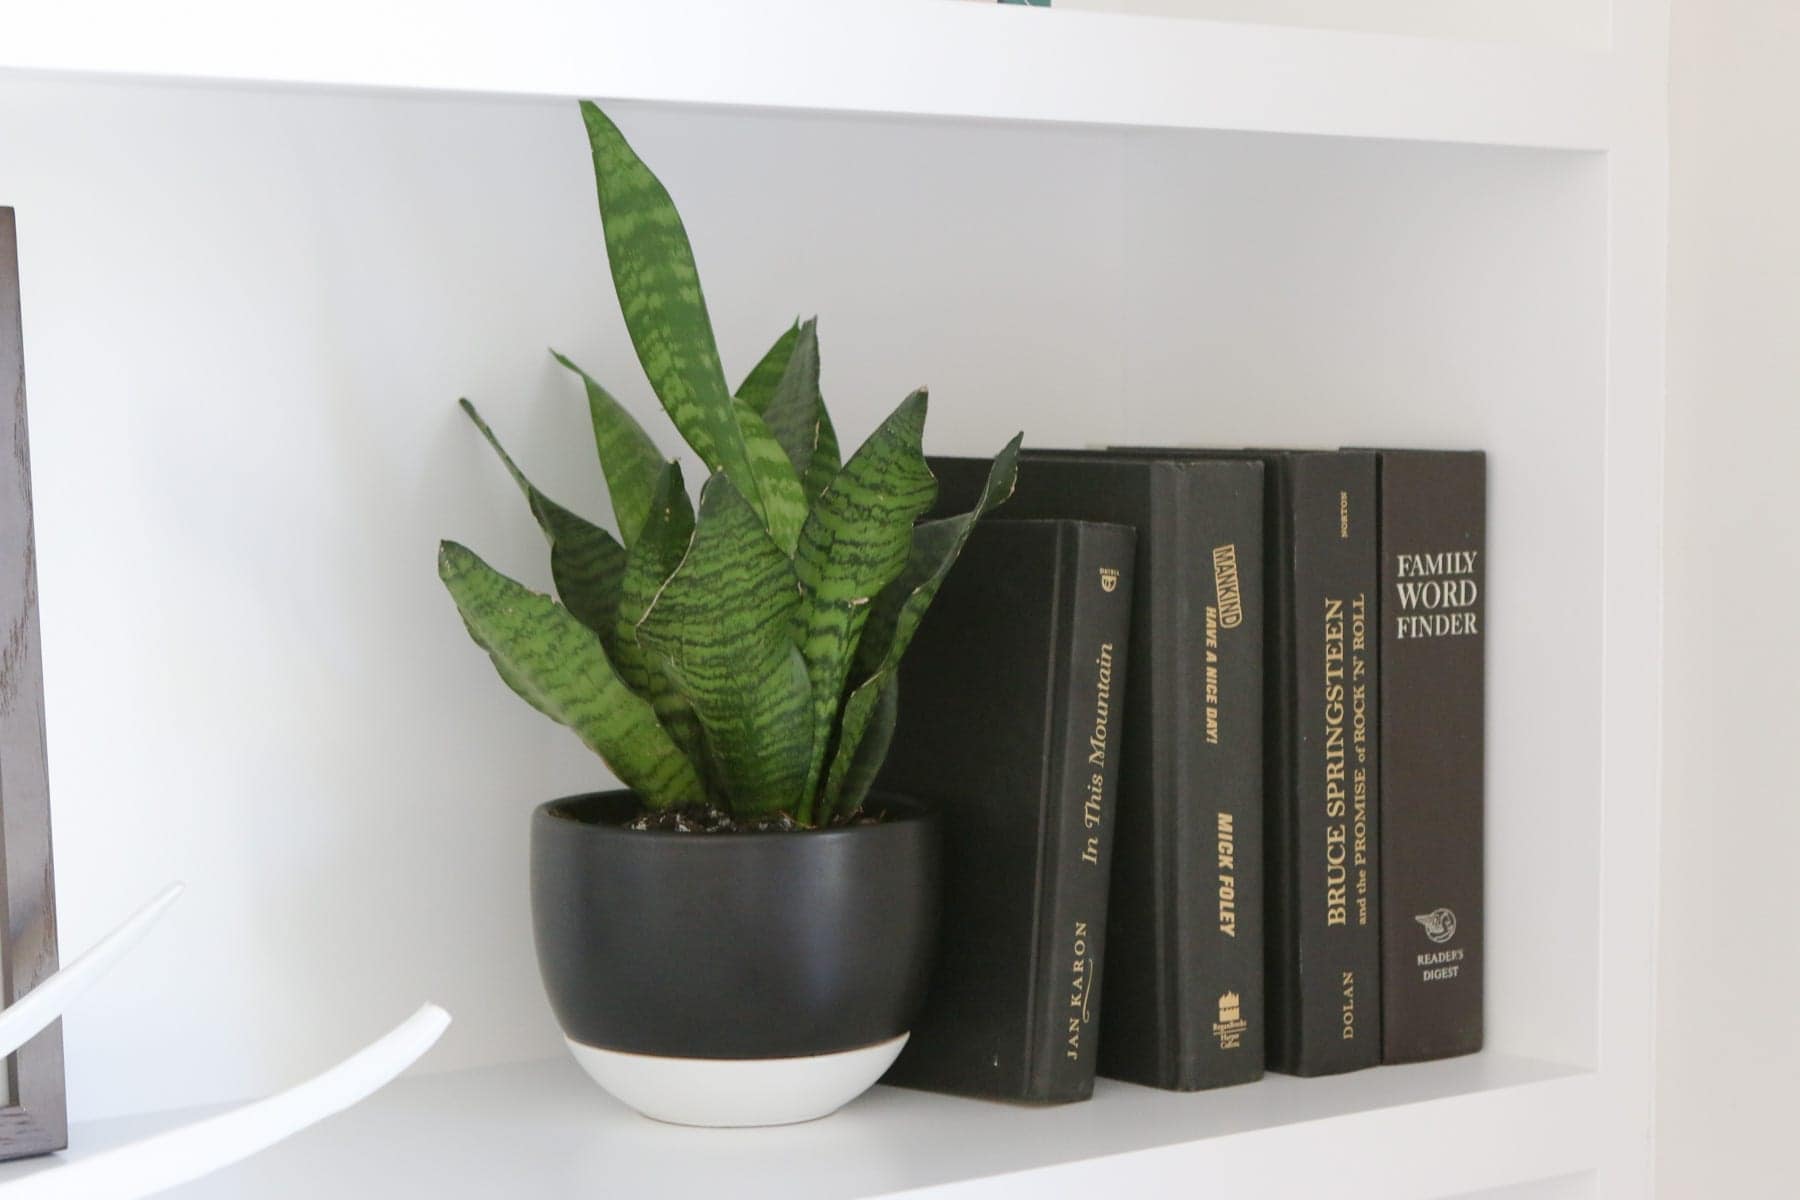 Black books and a plant are well styled on this built-in shelf